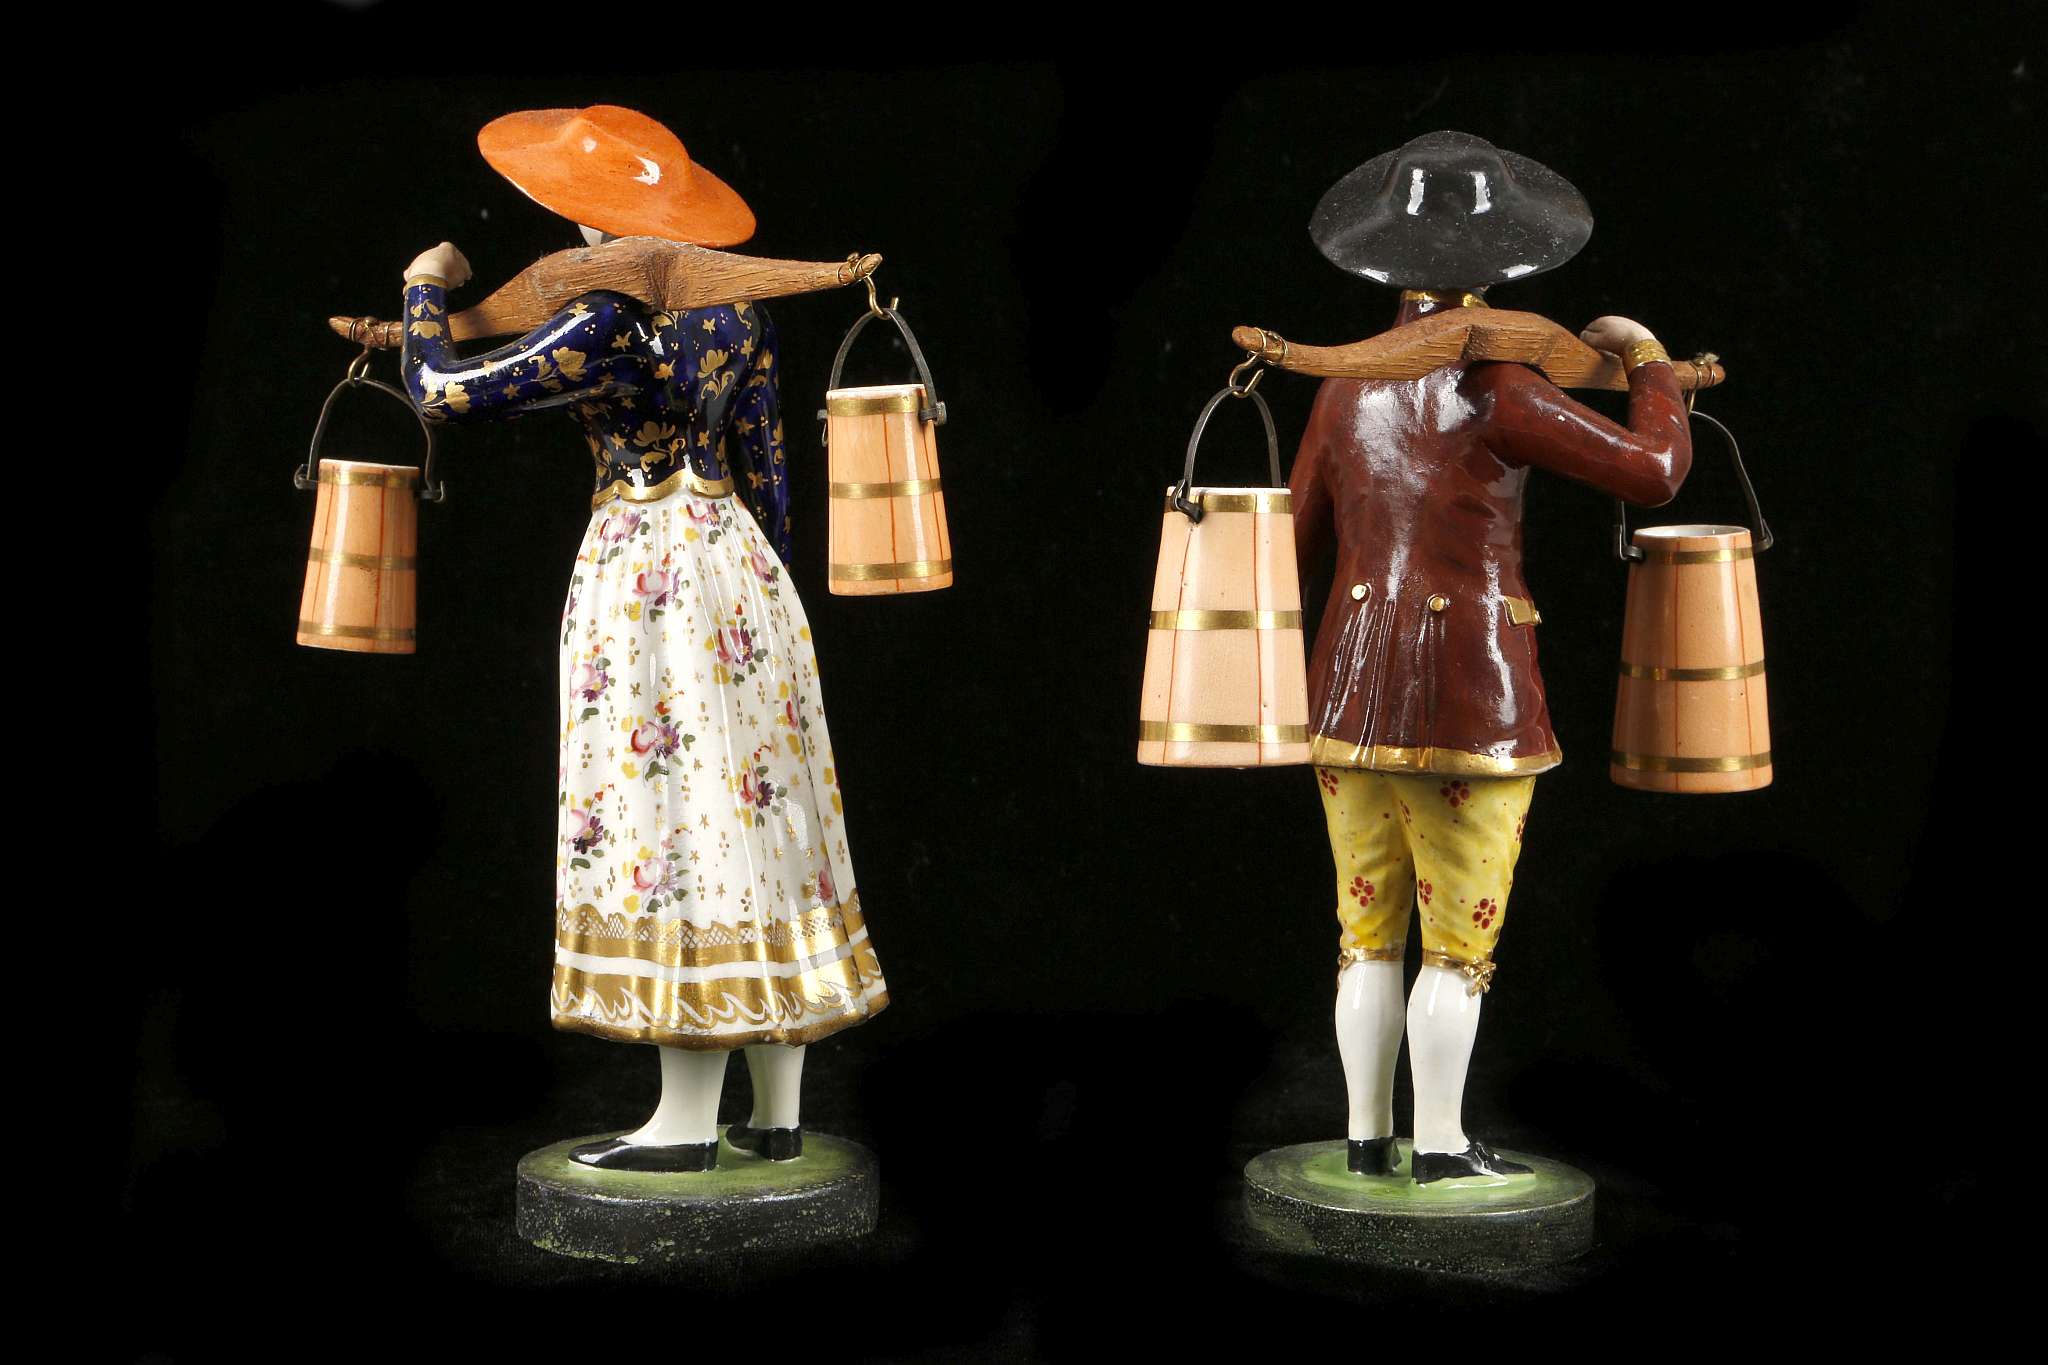 A PAIR OF DERBY FIGURES OF A MILKMAN AND MILKMAID, circa 1820, both modelled standing, carrying - Image 2 of 4